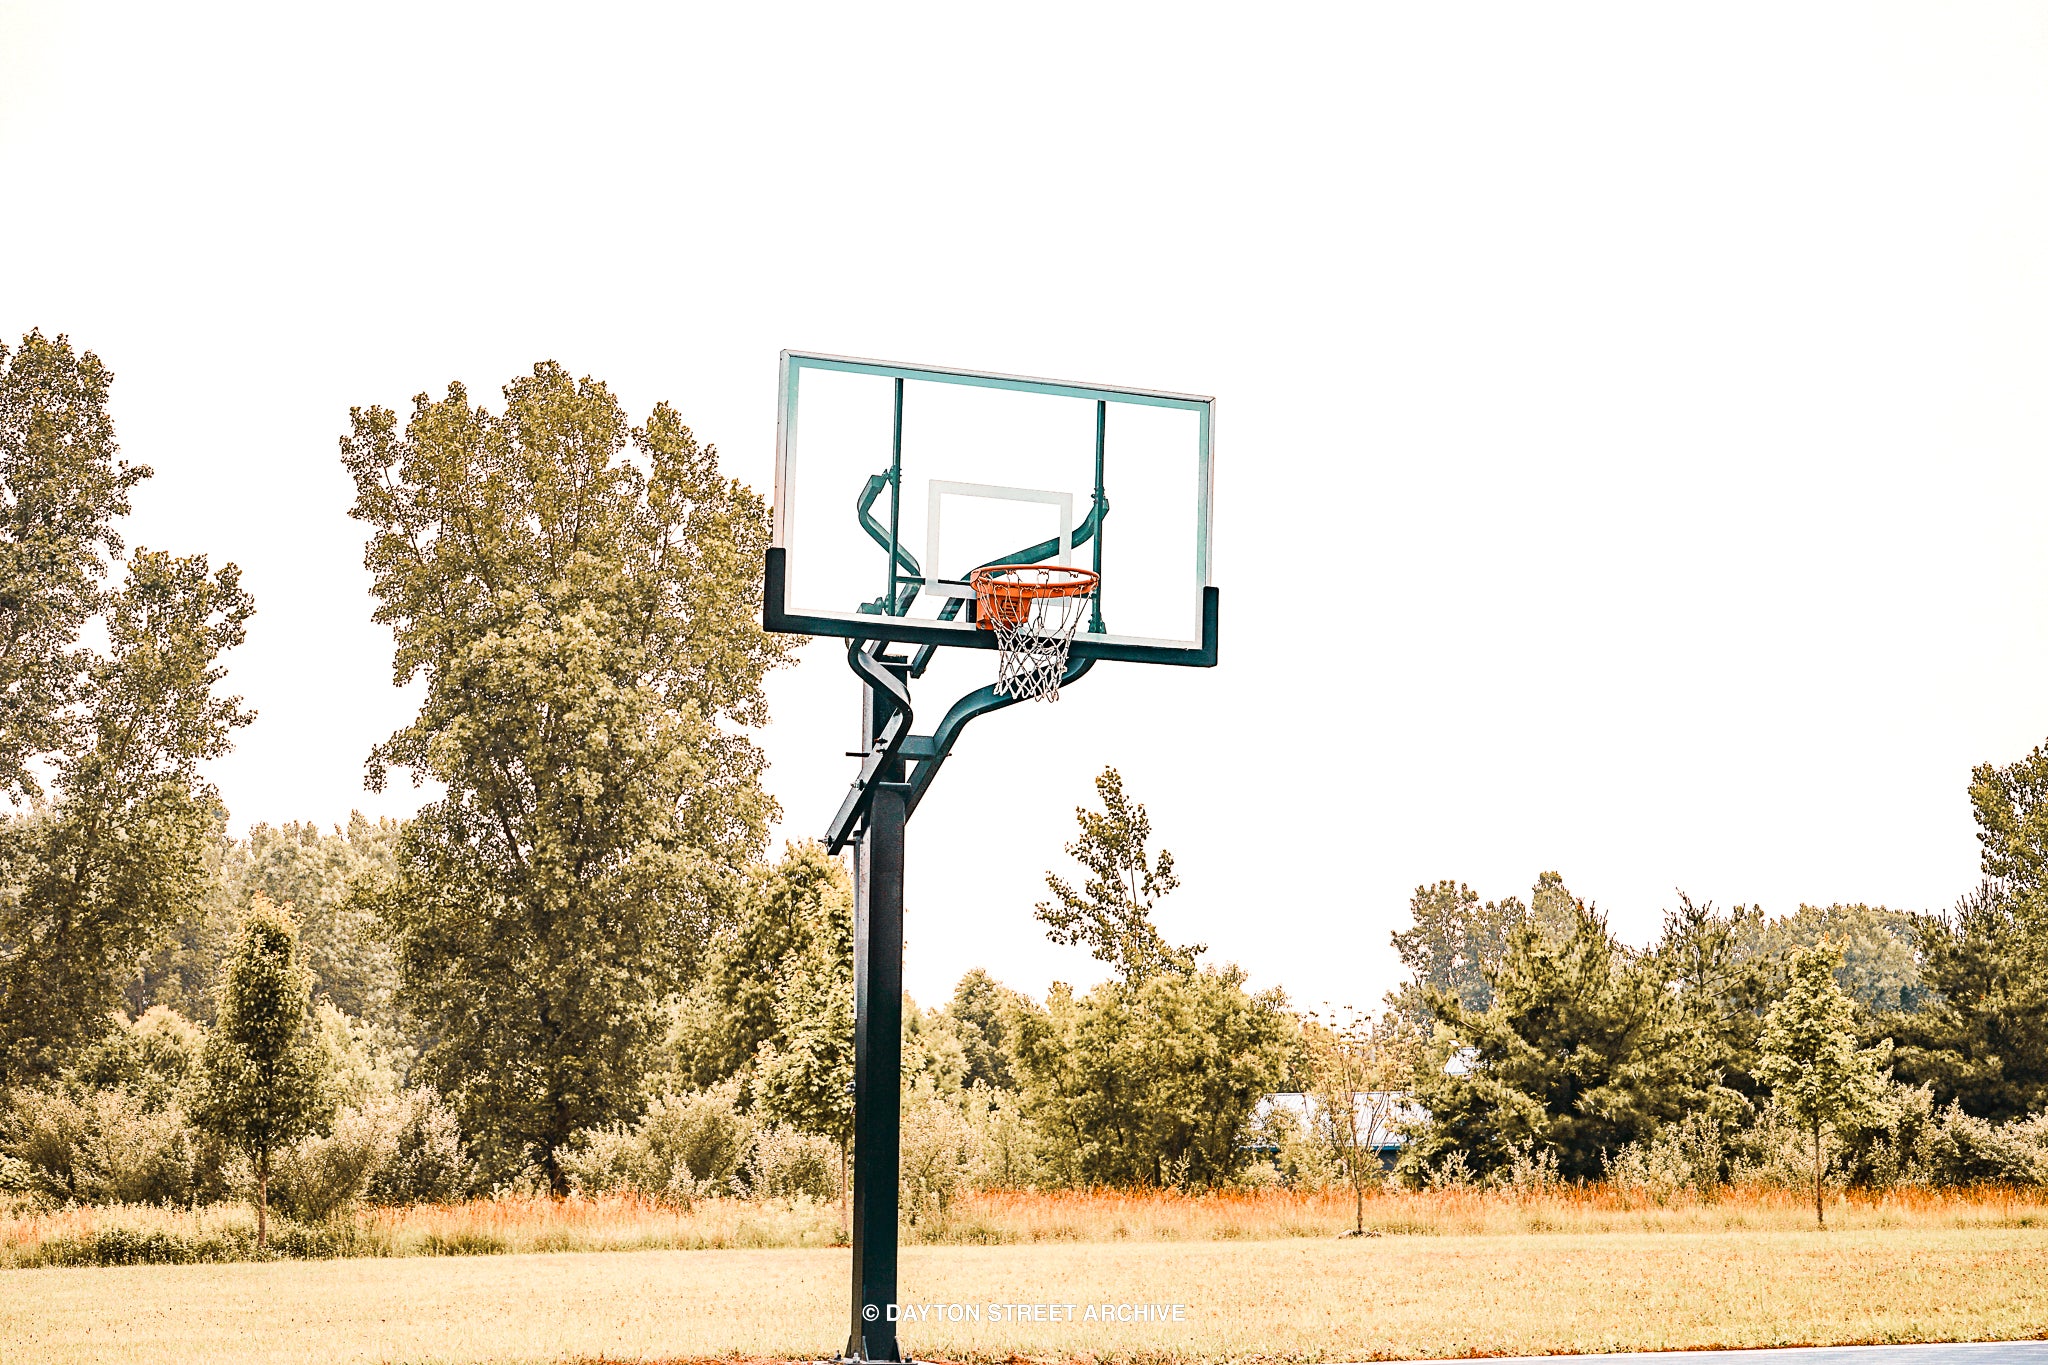 Photograph of beautiful basketball hoop in Michigan court with golden grass